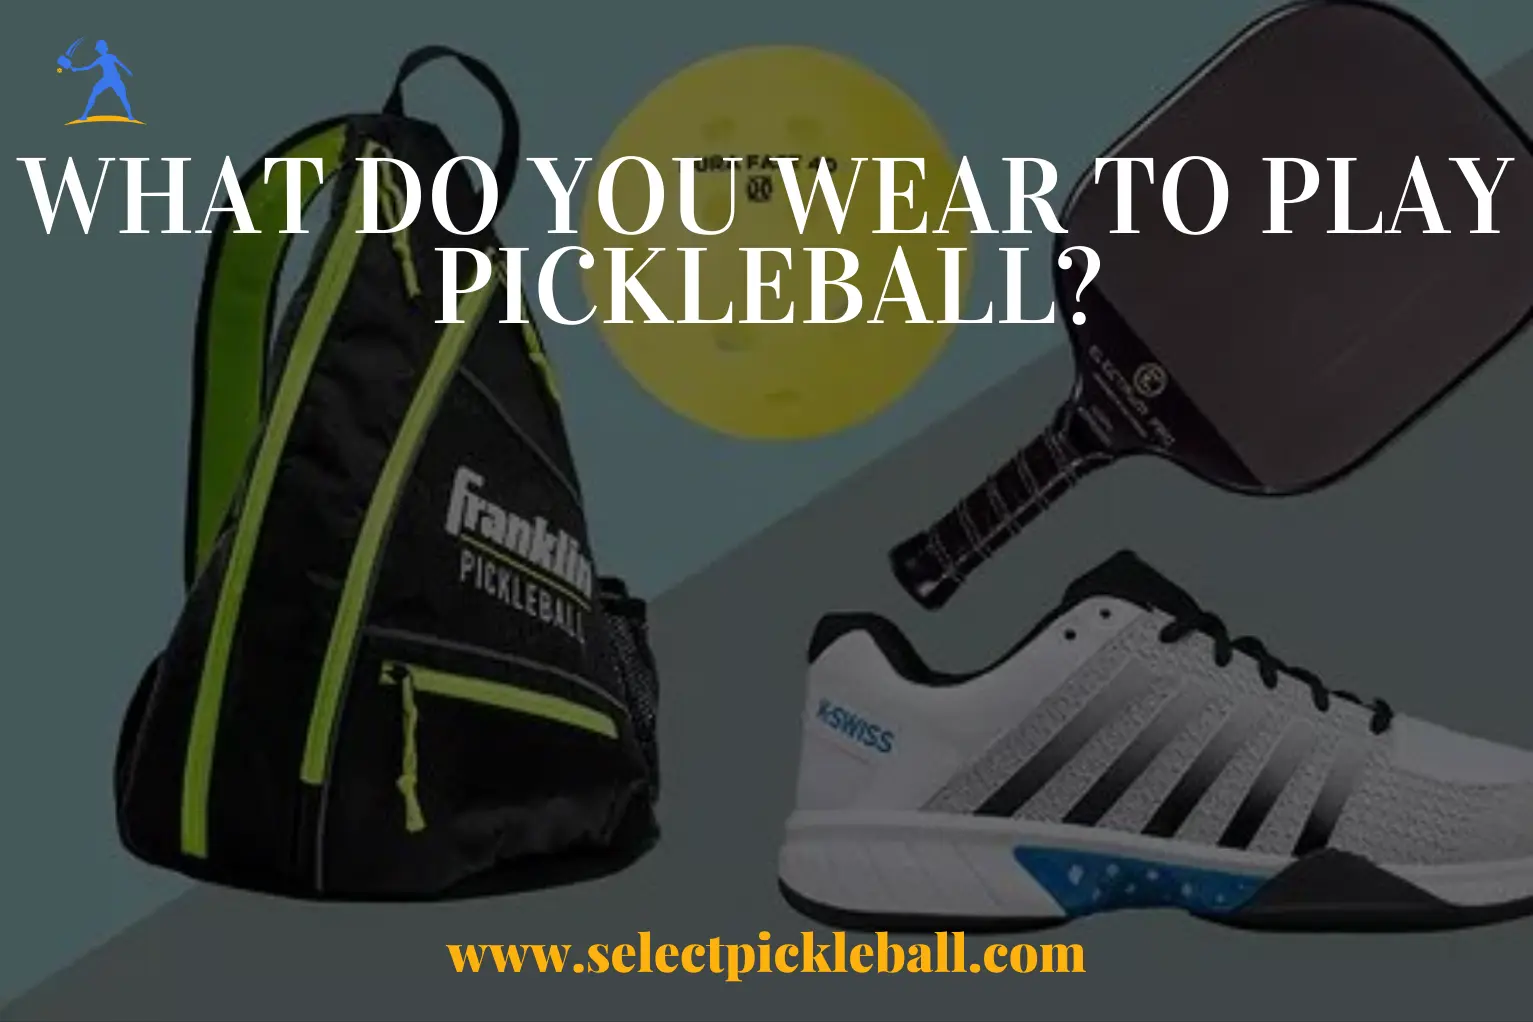 What Do You Wear To Play Pickleball?